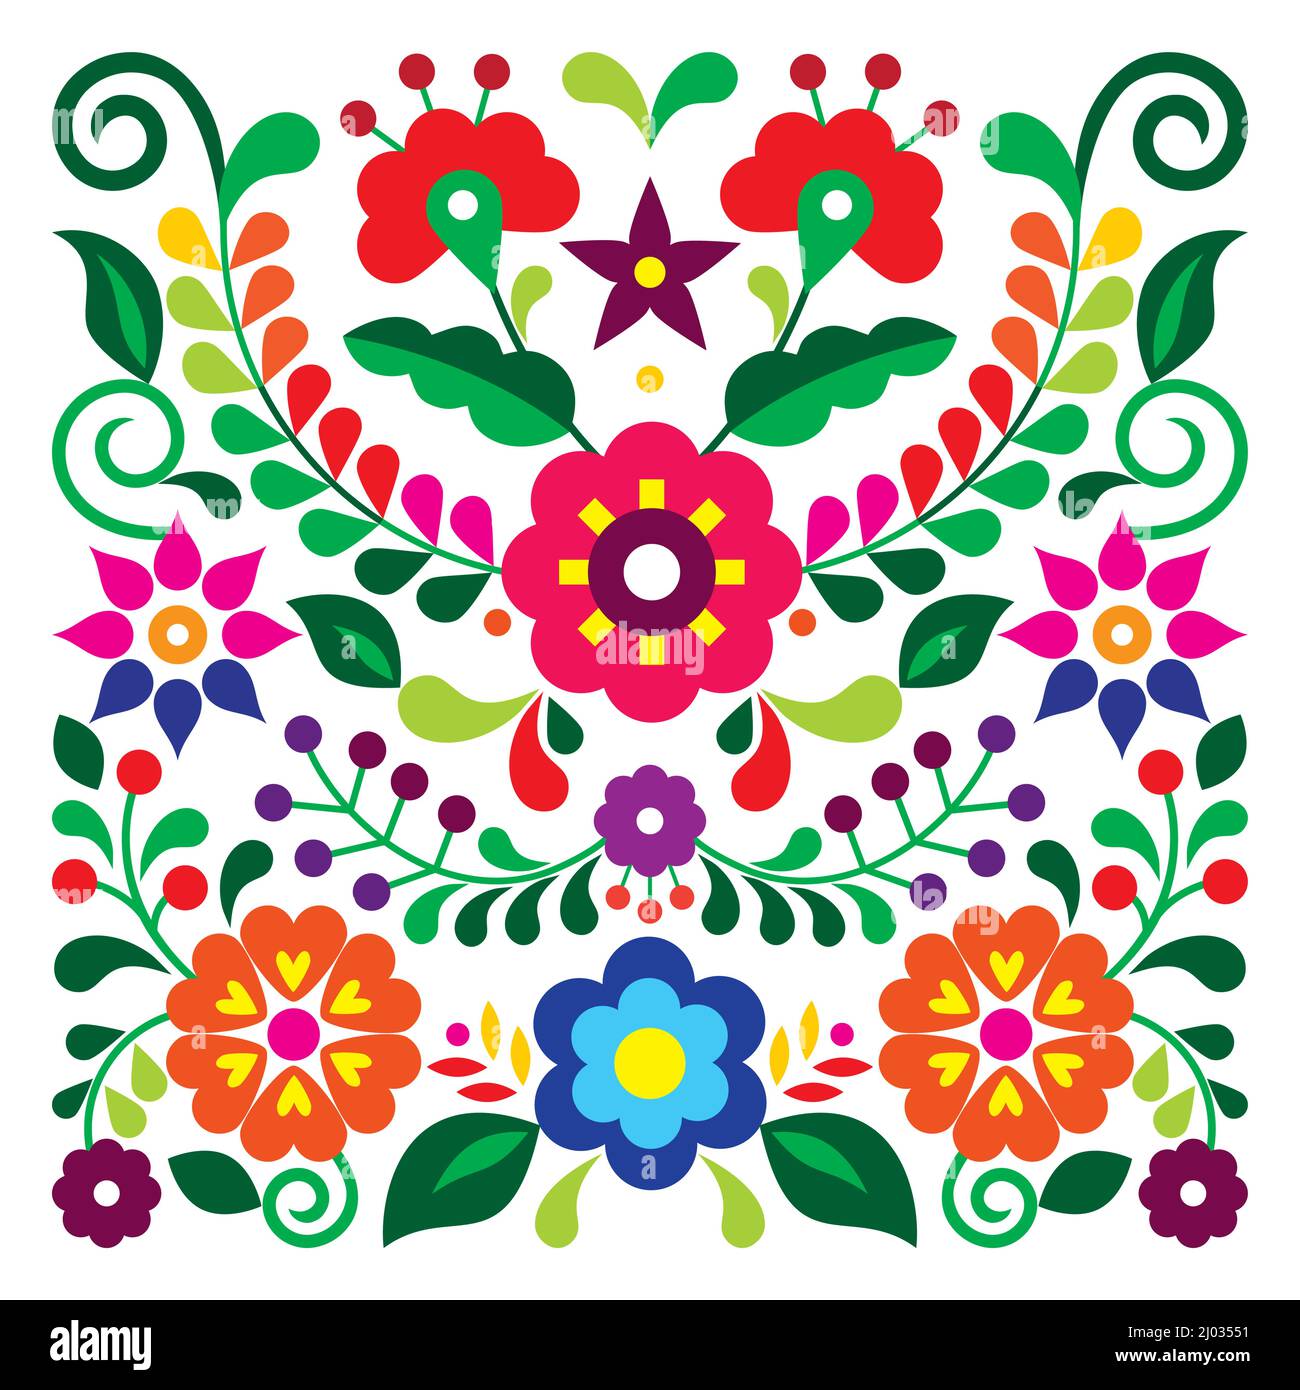 Mexican Tattooist Stitches Colorful Floral Tattoos Inspired by Her  Culture  Embroidery tattoo Floral tattoo Sewing tattoos